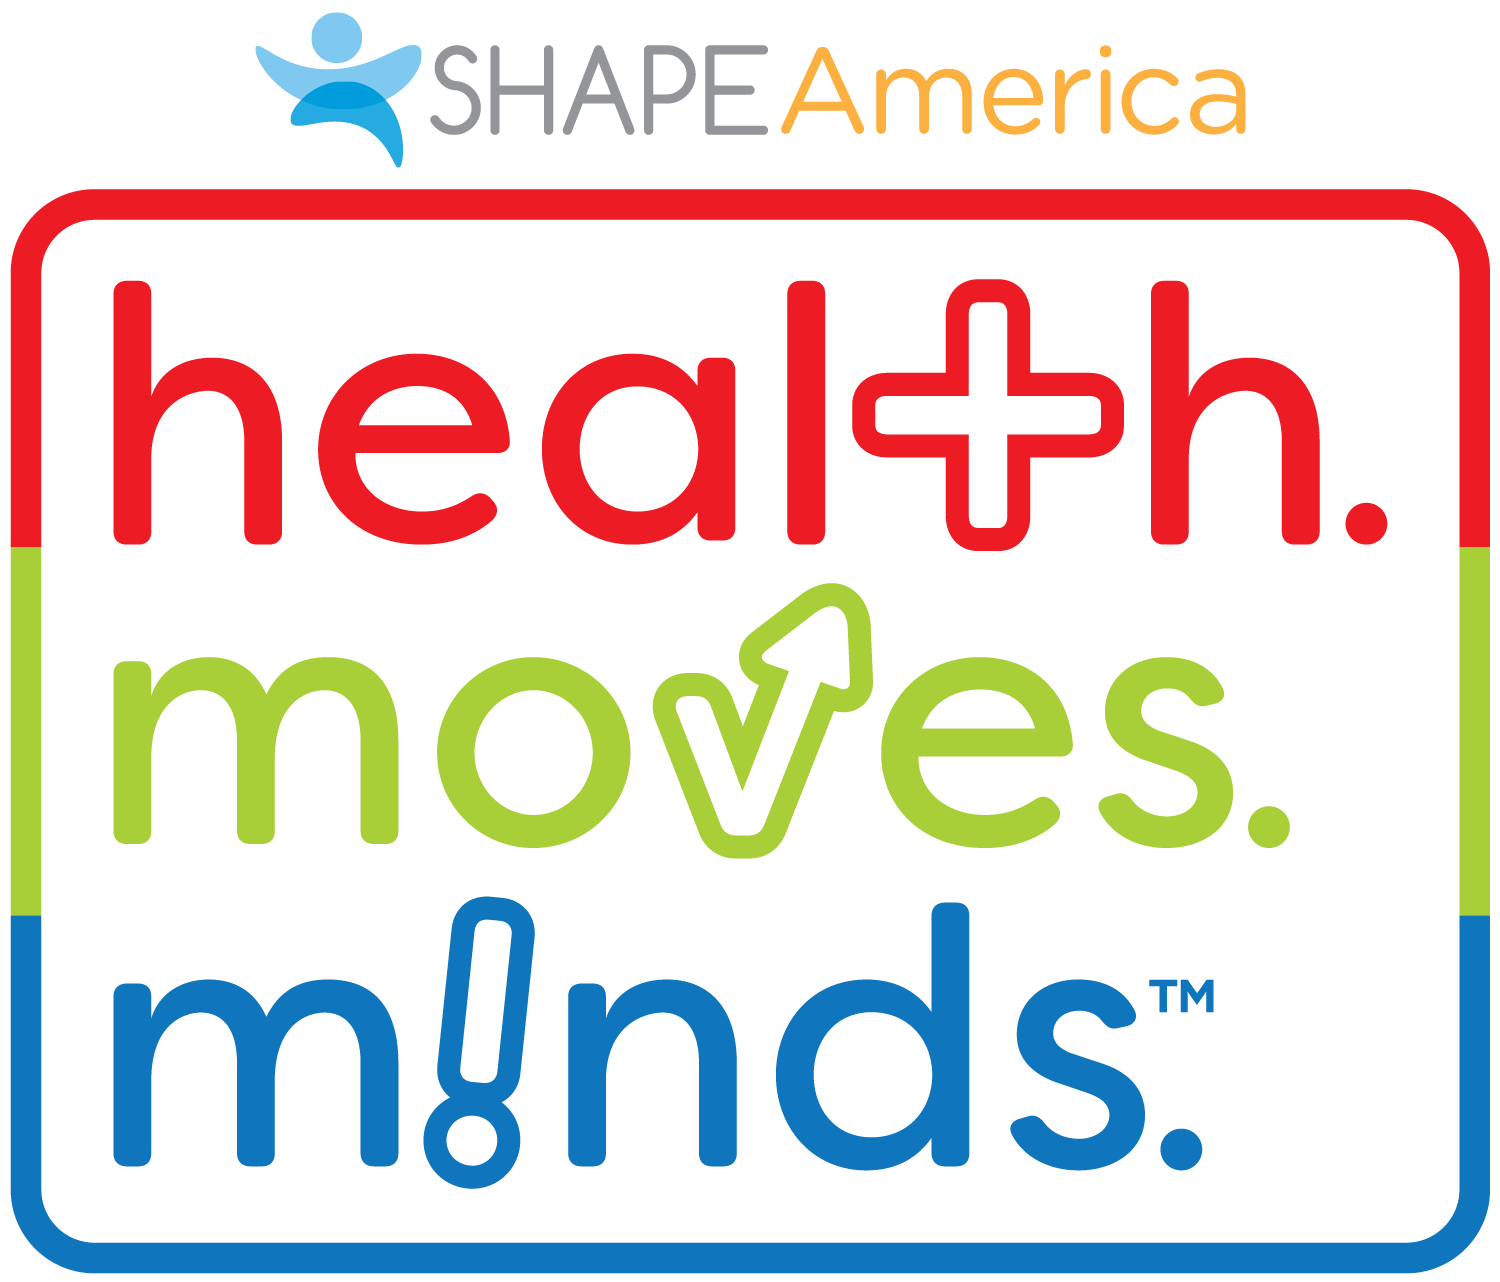 Health Moves Minds